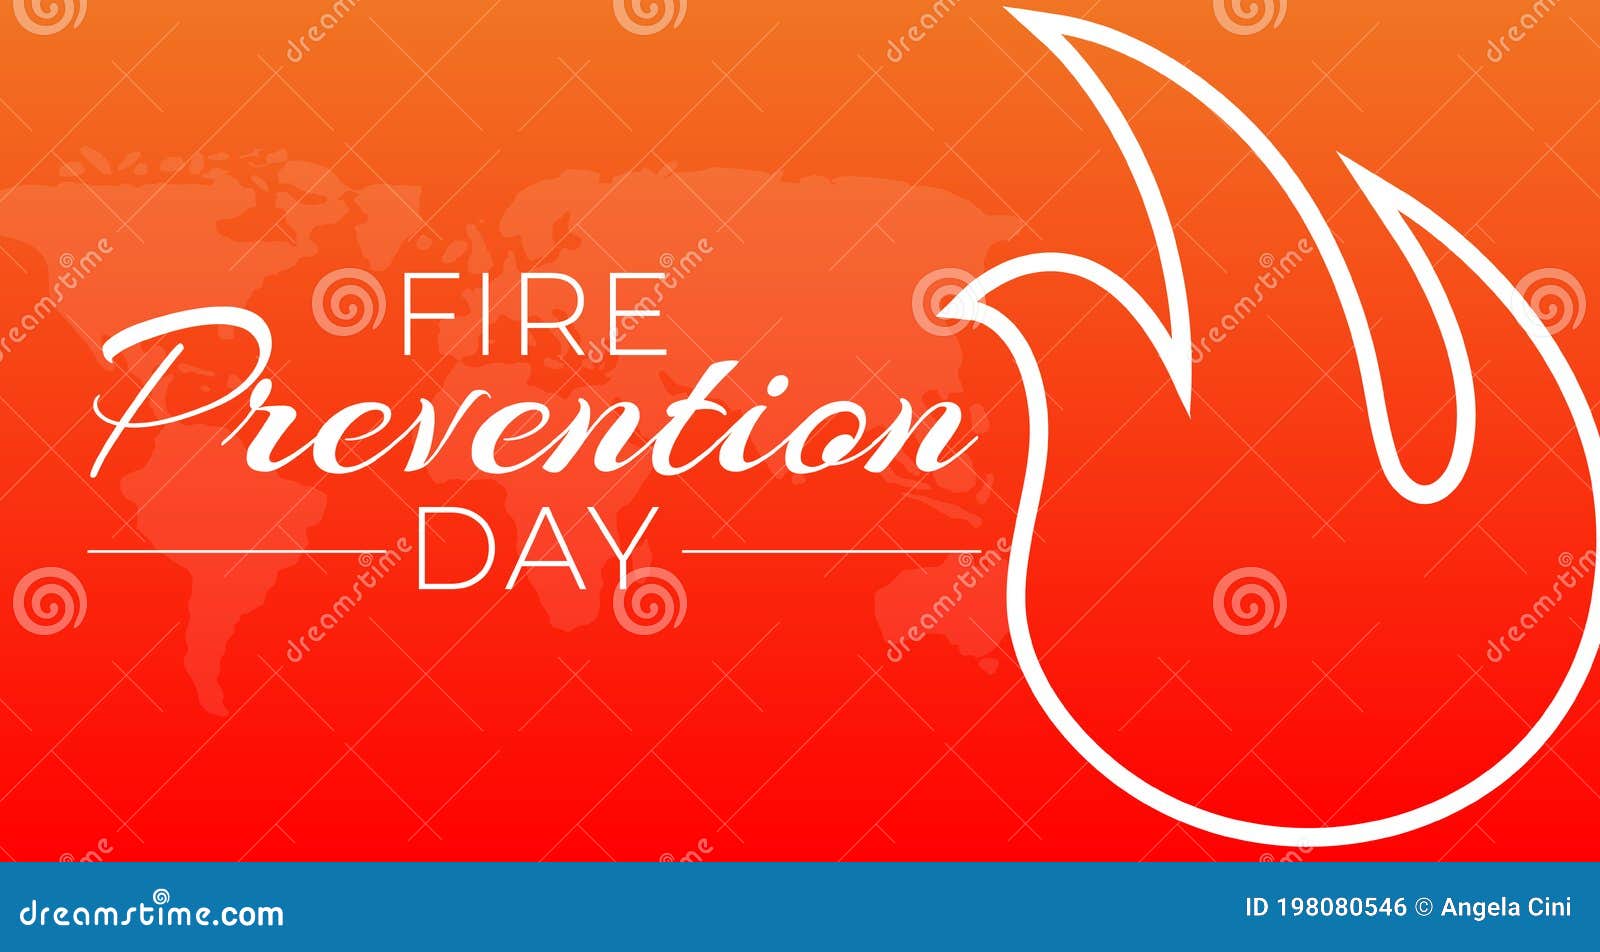 Fire Prevention Day Background Illustration with Flame Symbol Stock